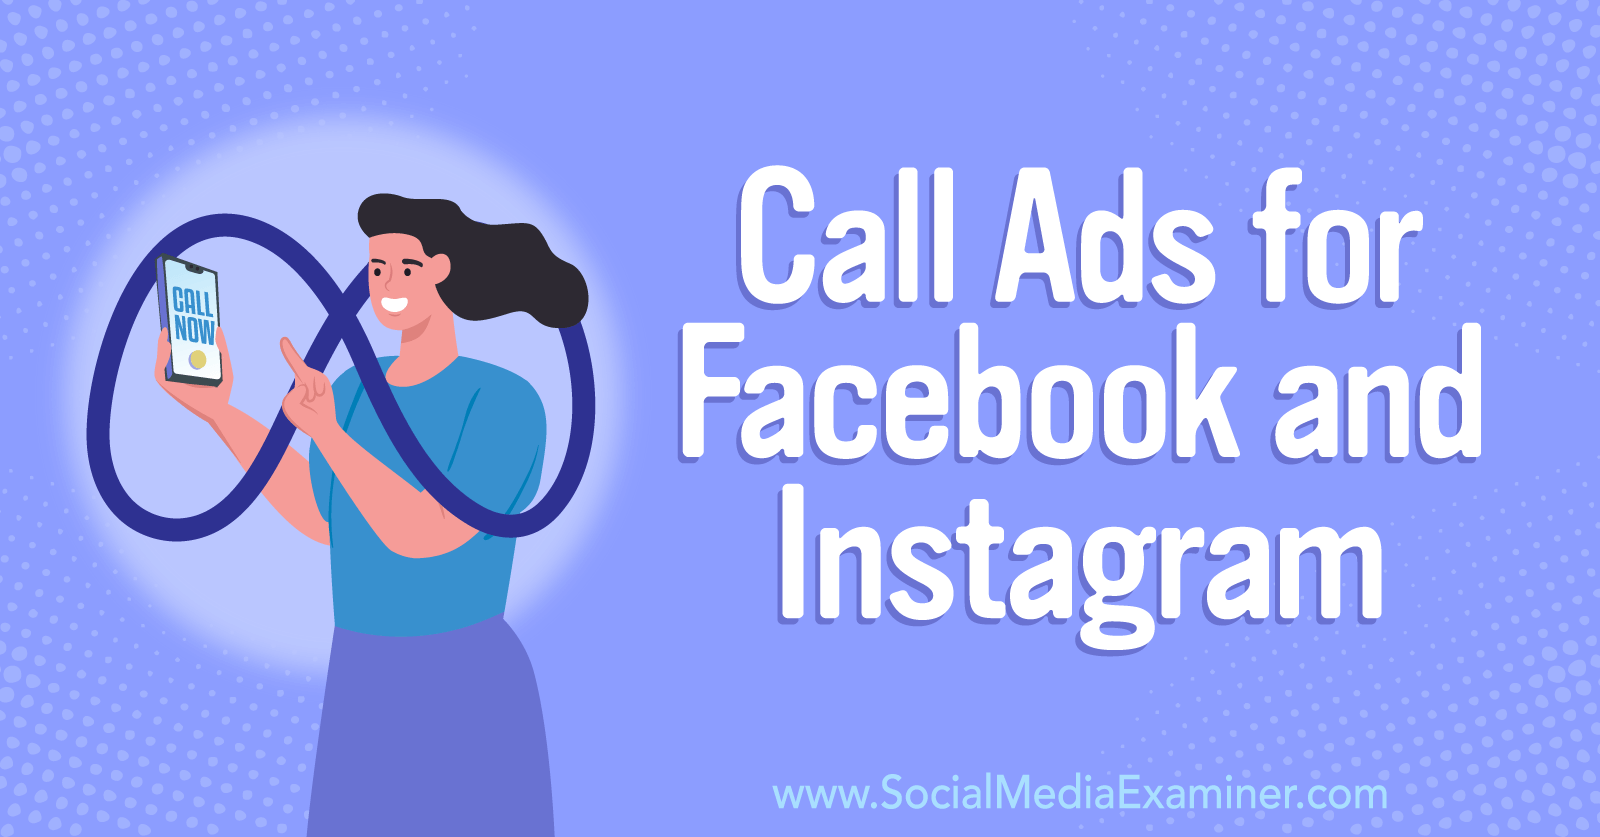 How to Get Customers to Call You: Call Ads for Facebook and Instagram-Social Media Examiner